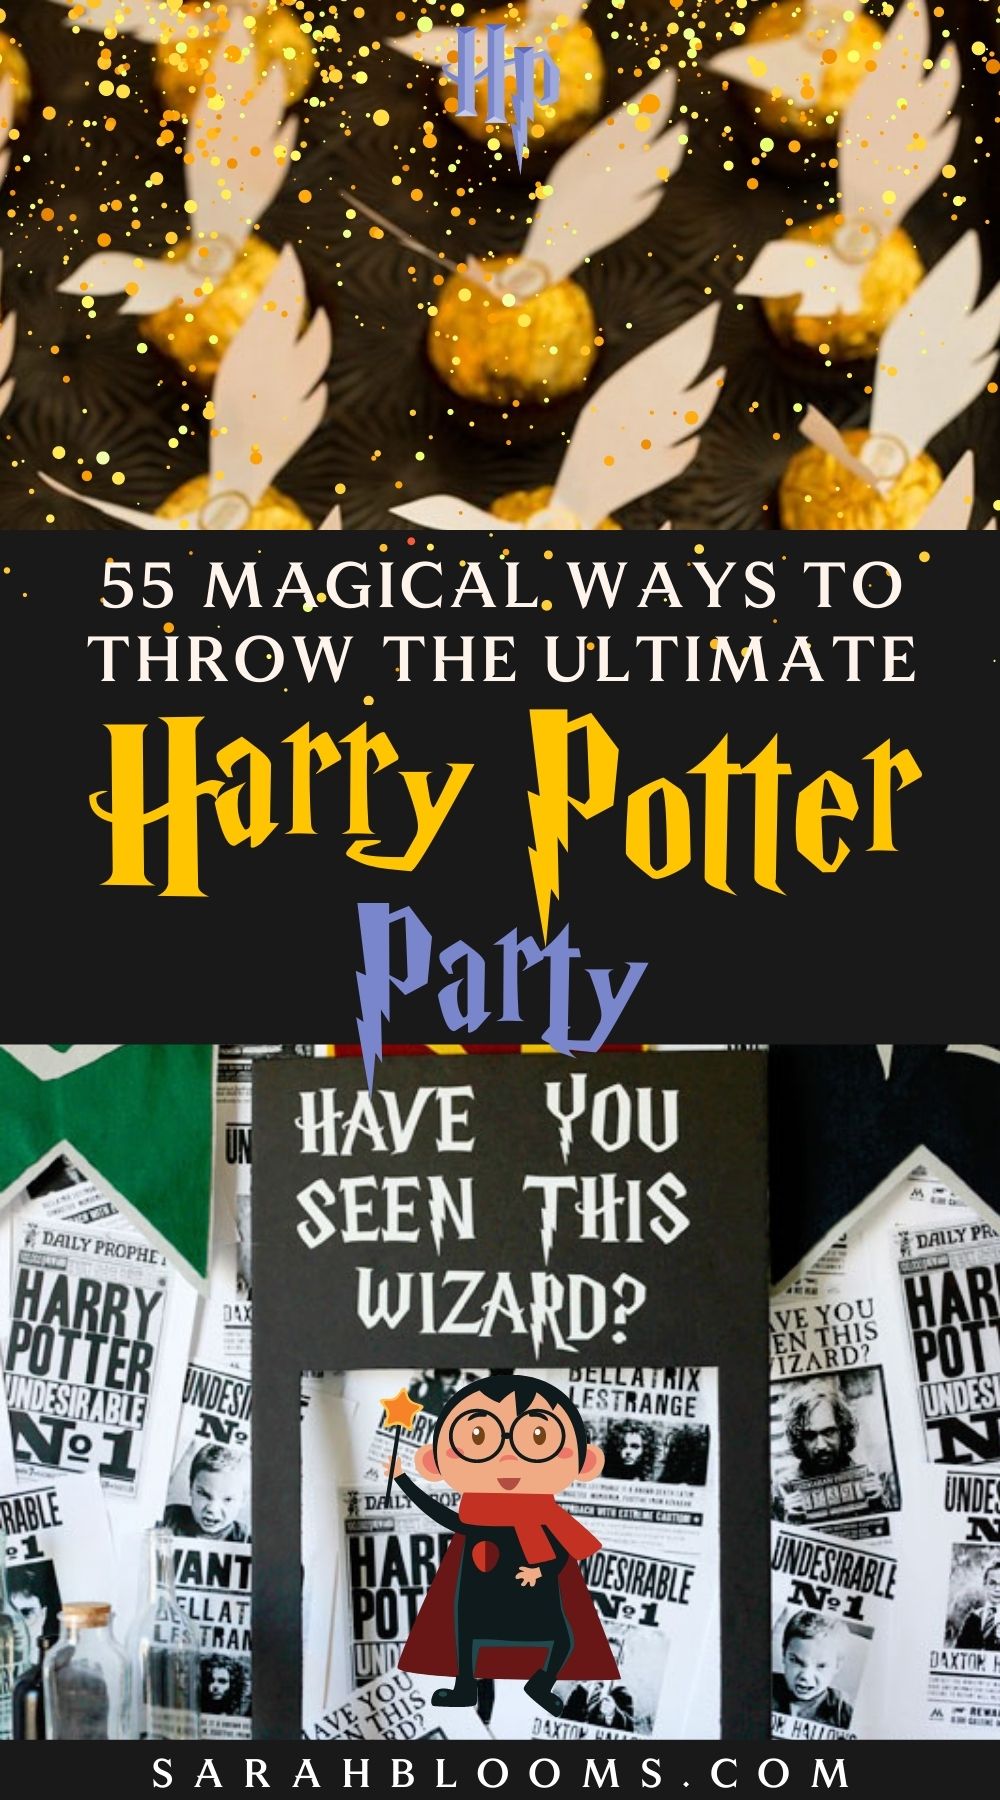 Throw a magical Harry Potter Party for the holidays, birthdays, or just because with these 55 Best Ever Harry Potter Party Ideas! Wow your guests with these fun and irreverent Harry Potter Party Ideas that anyone can do! #harrypotterparty #harrypotterpartyideas